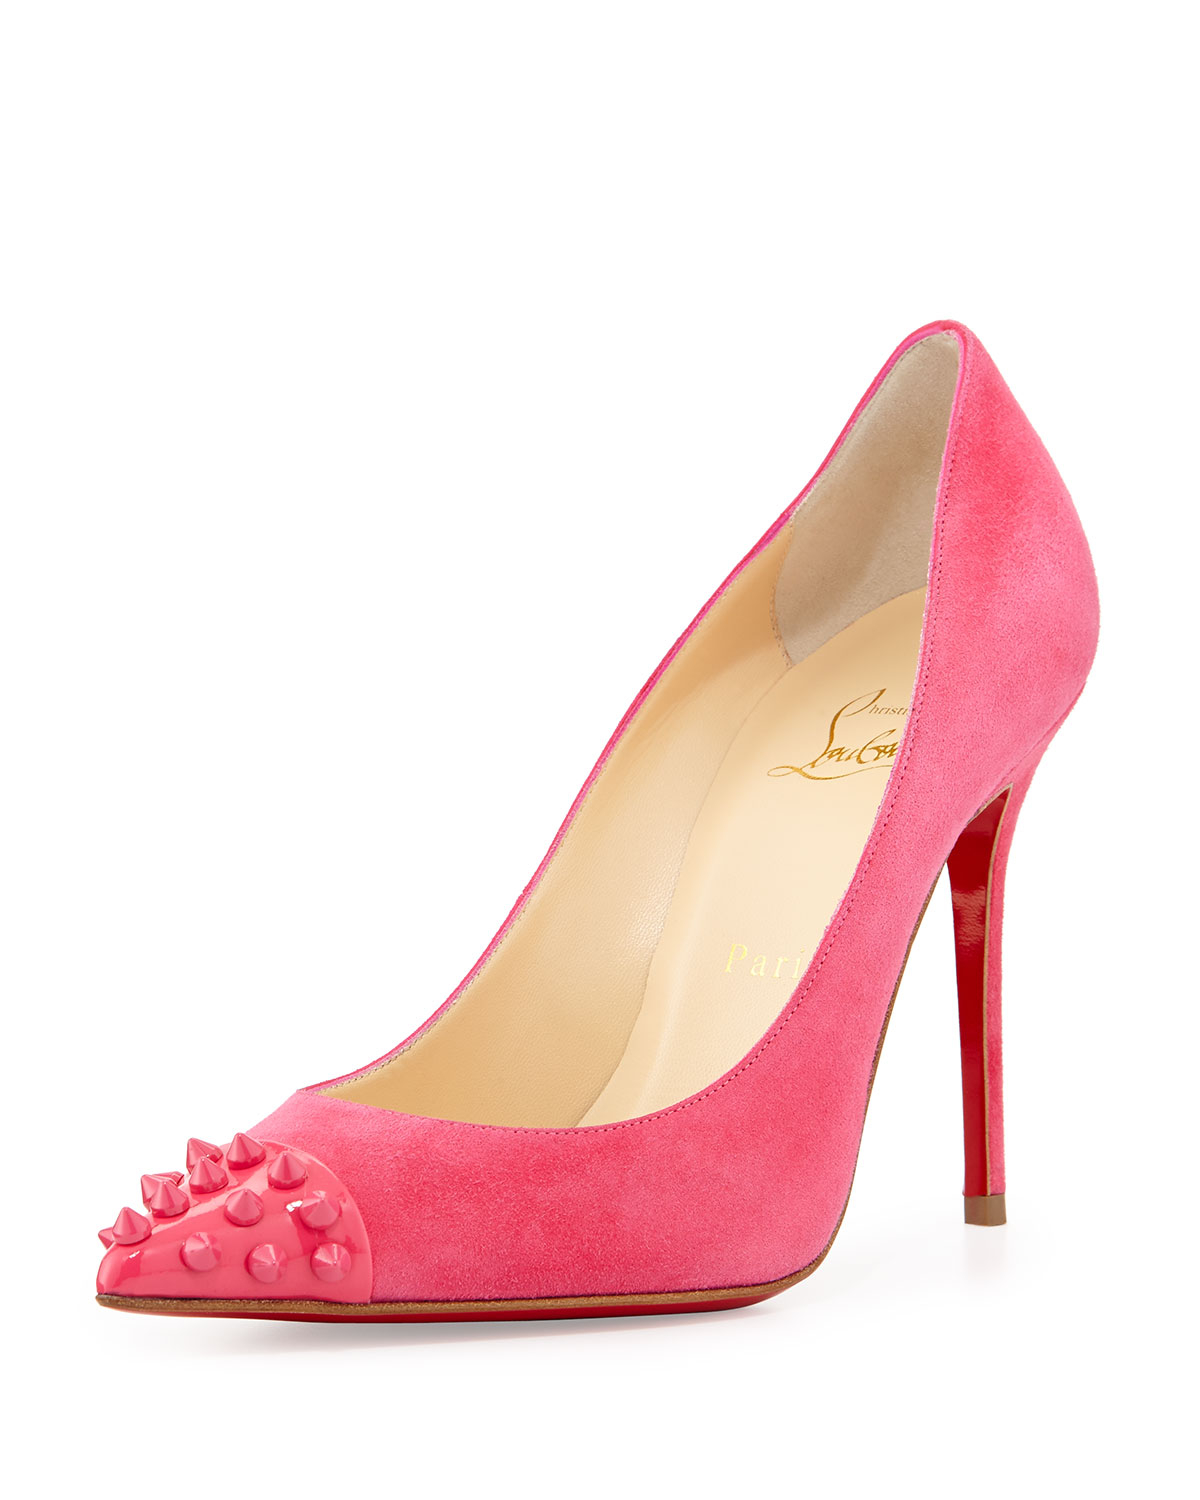 Christian louboutin Geo Spike Point-Toe Red Sole Pump in Pink | Lyst